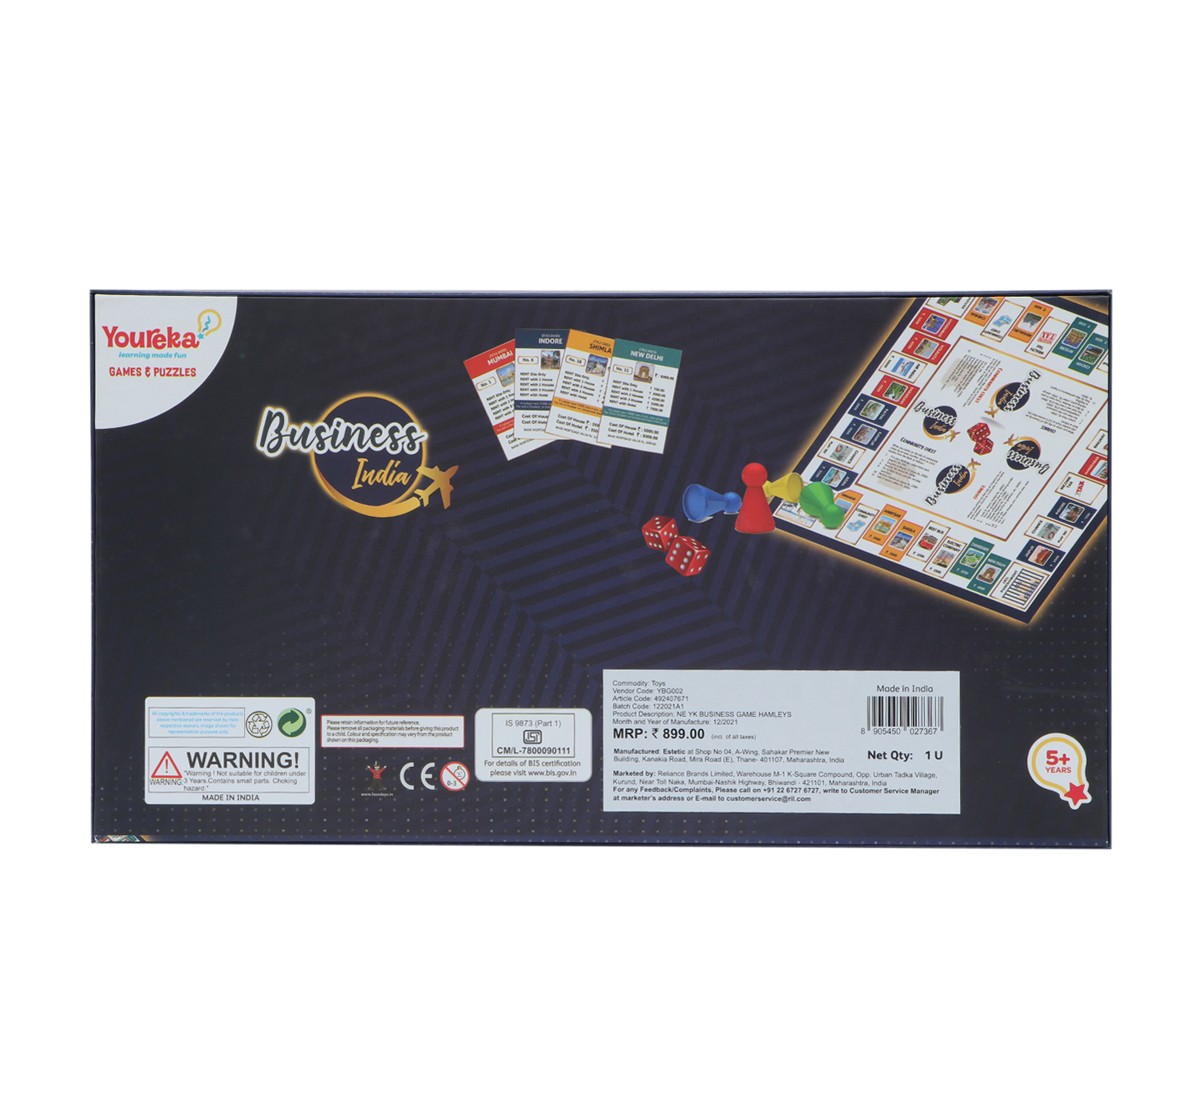 Youreka Business Game Multicolour 7Y+